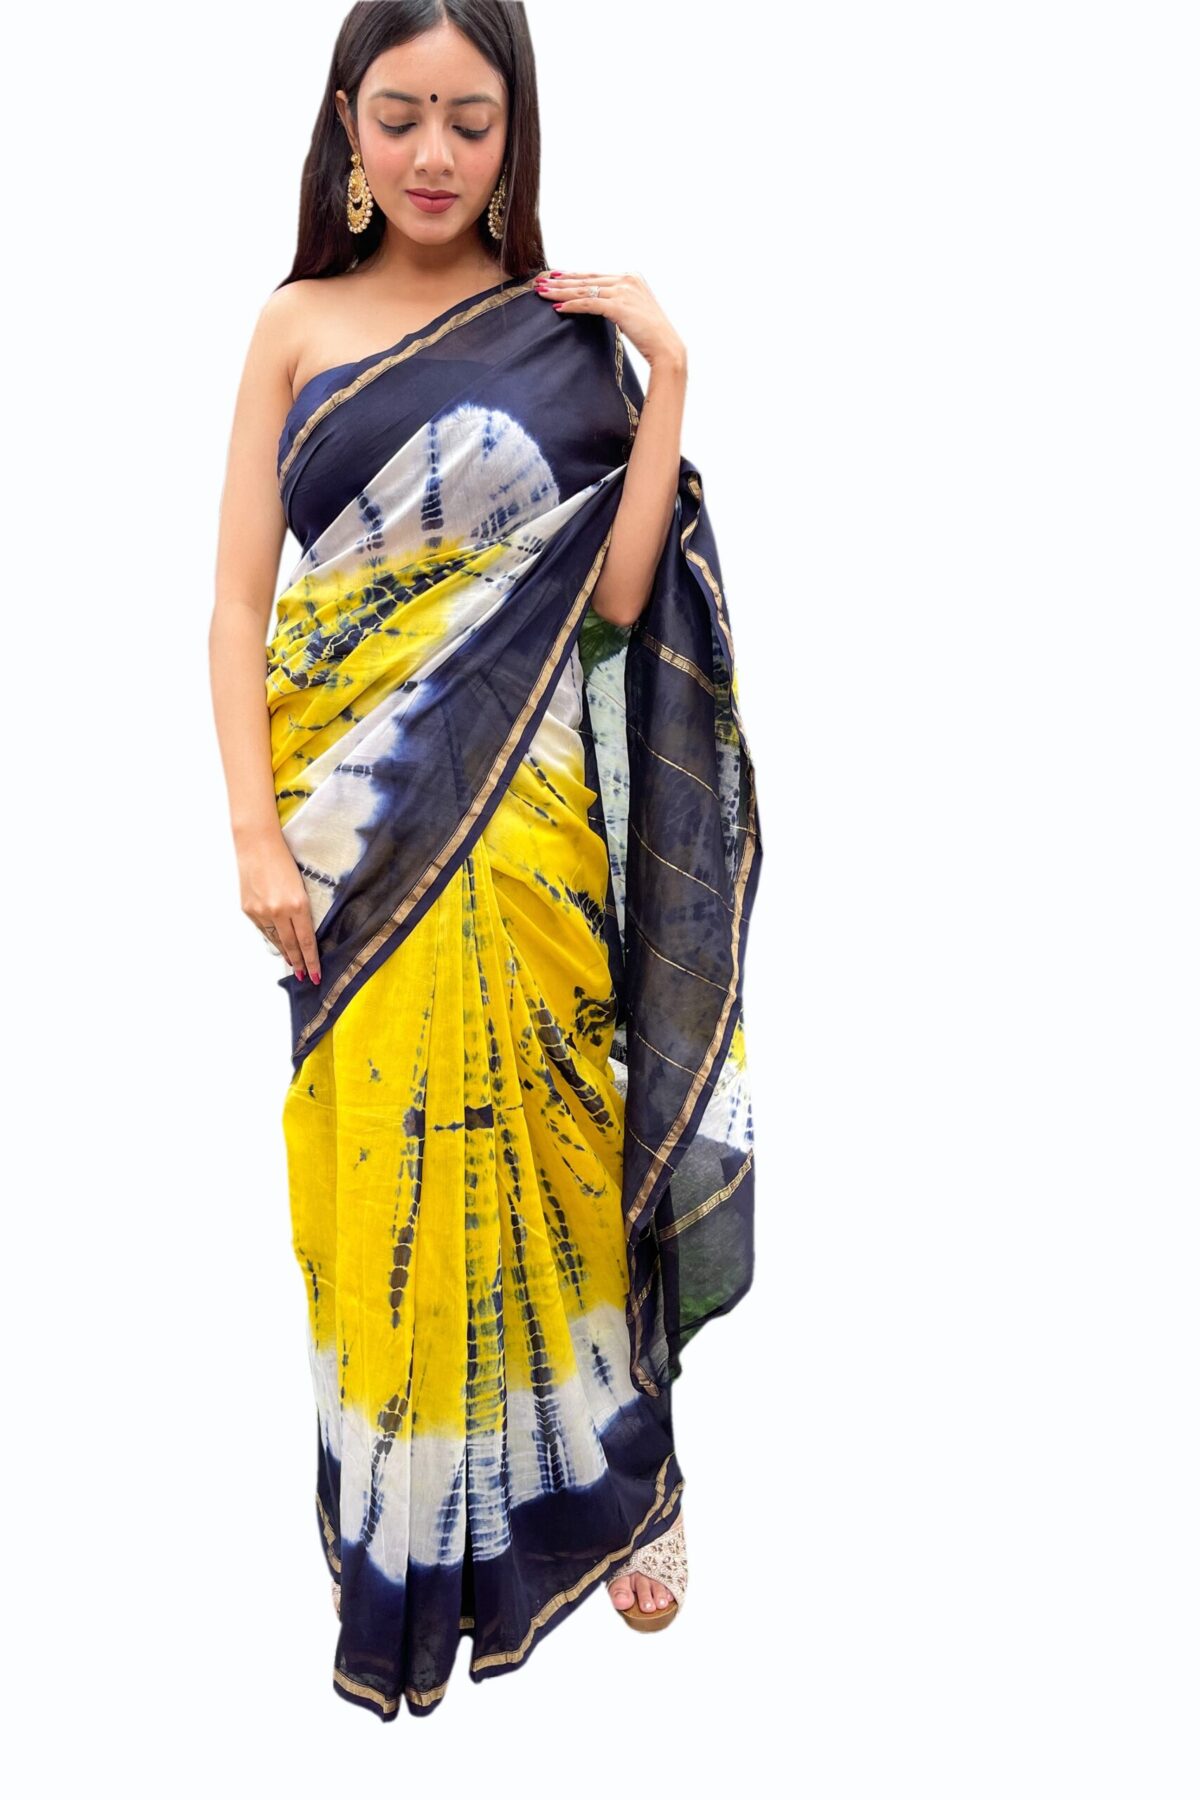 Chanderi Saree with Blouse Piece (Navy Blue & Yellow)